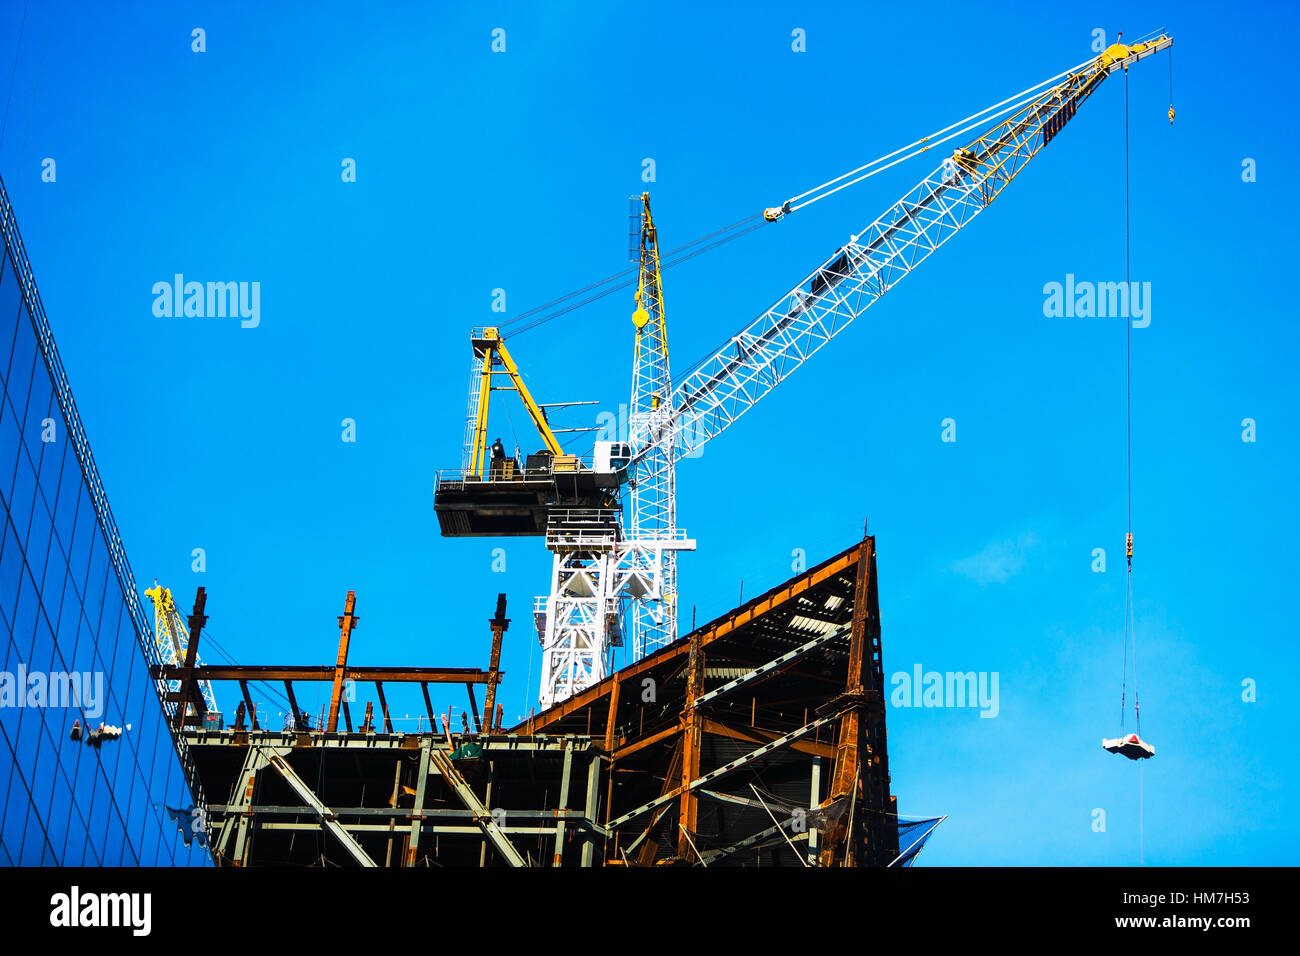 Crane at construction site against clear sky Stock Photo